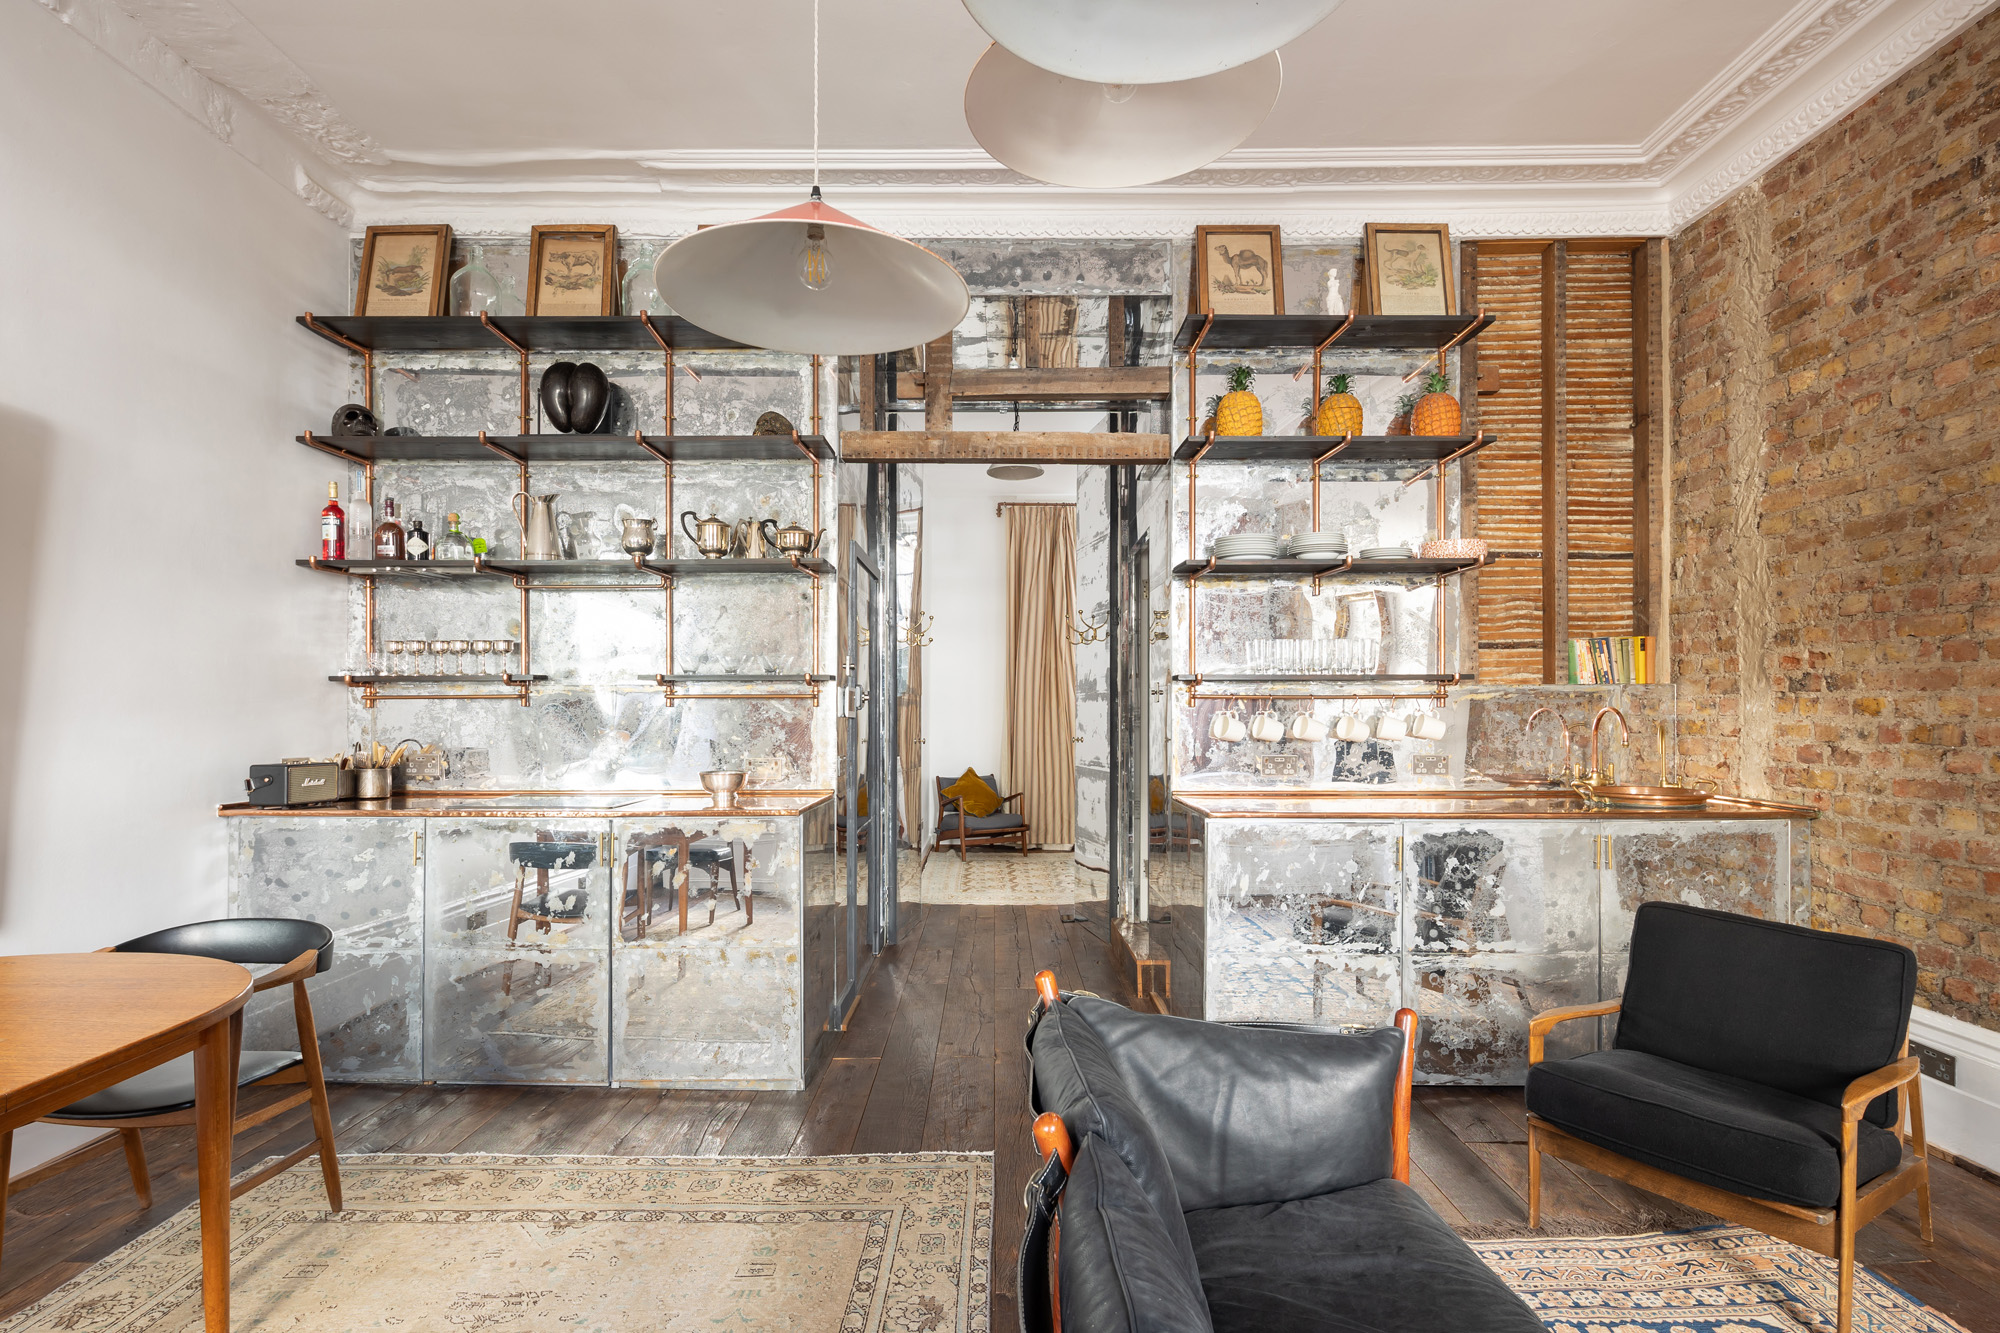 For Sale: Westbourne Grove Notting Hill W11A dramatic kitchen diner with mirrored cabinets